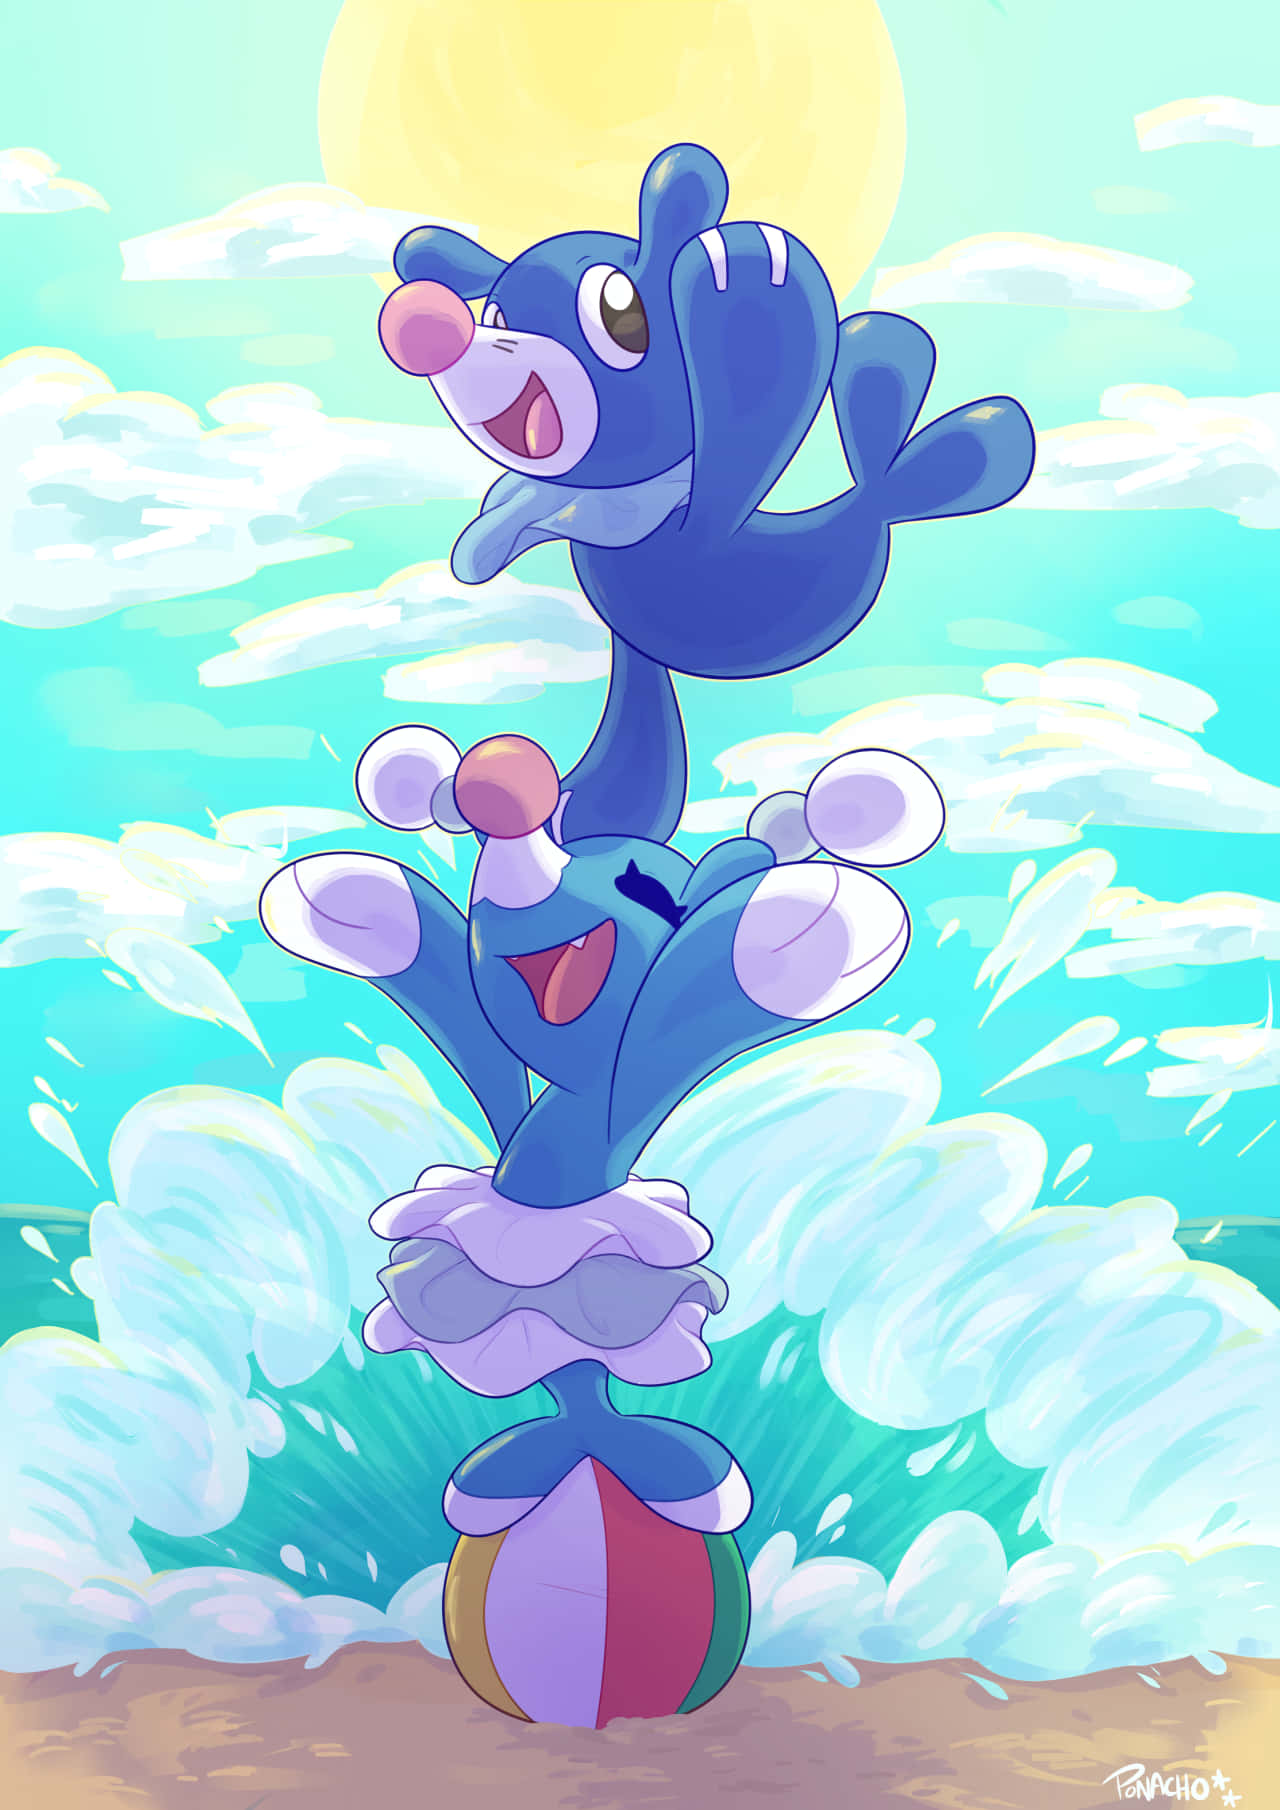 Popplio Standing On Top Of Brionne Wallpaper